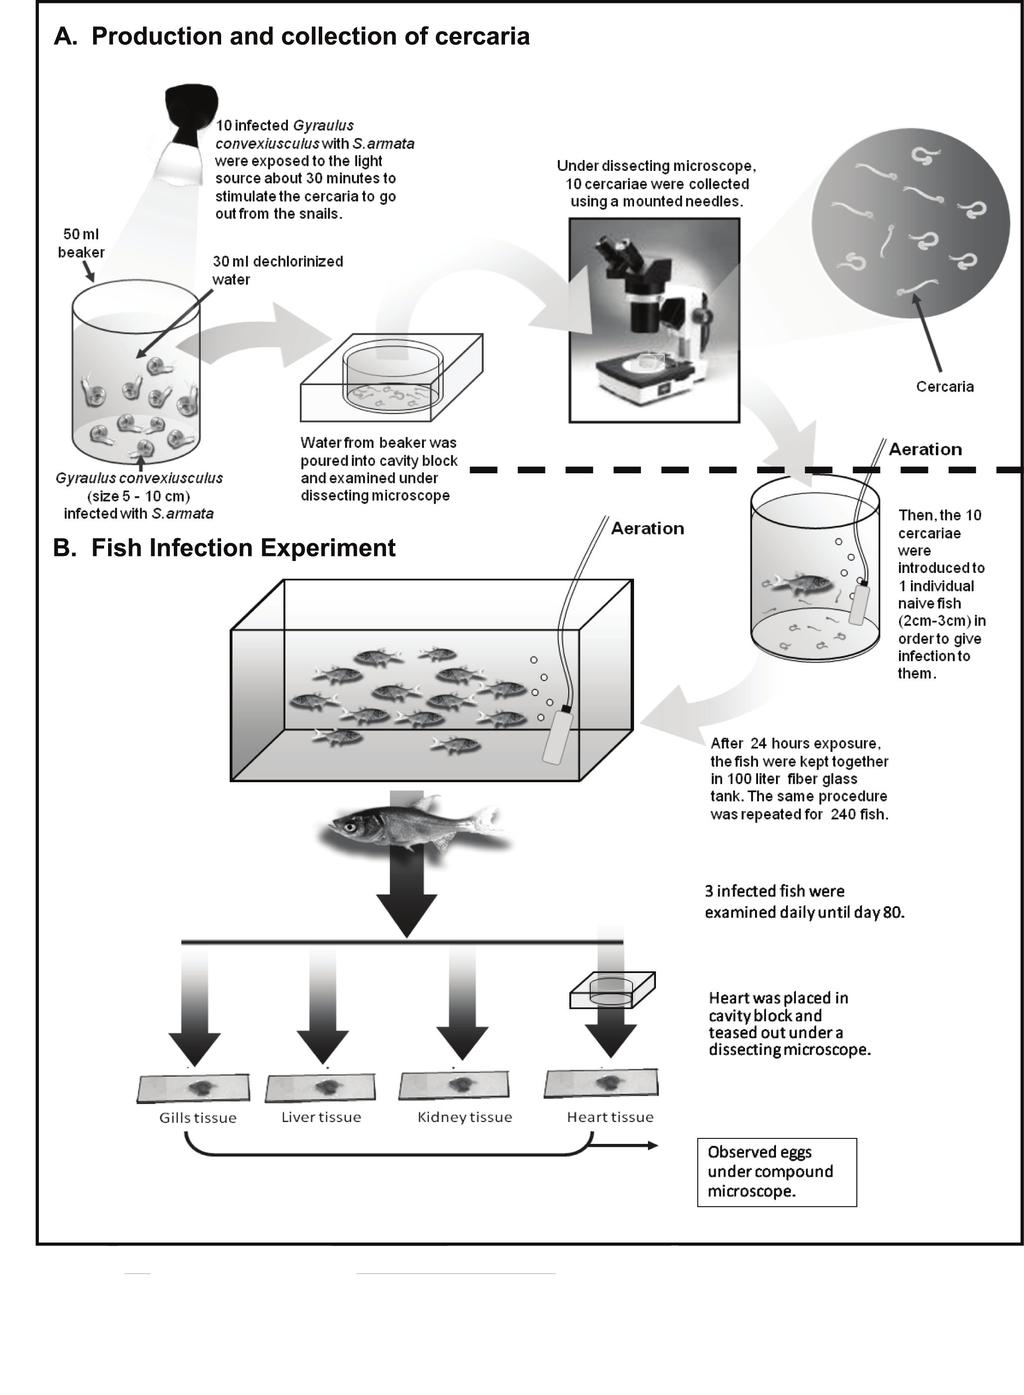 Shaharom-Harrison et al. Figure 2. The illustration of methodology for fish infection experiment. and examined under dissecting microscope to collect the cercariae using a mounted needle.